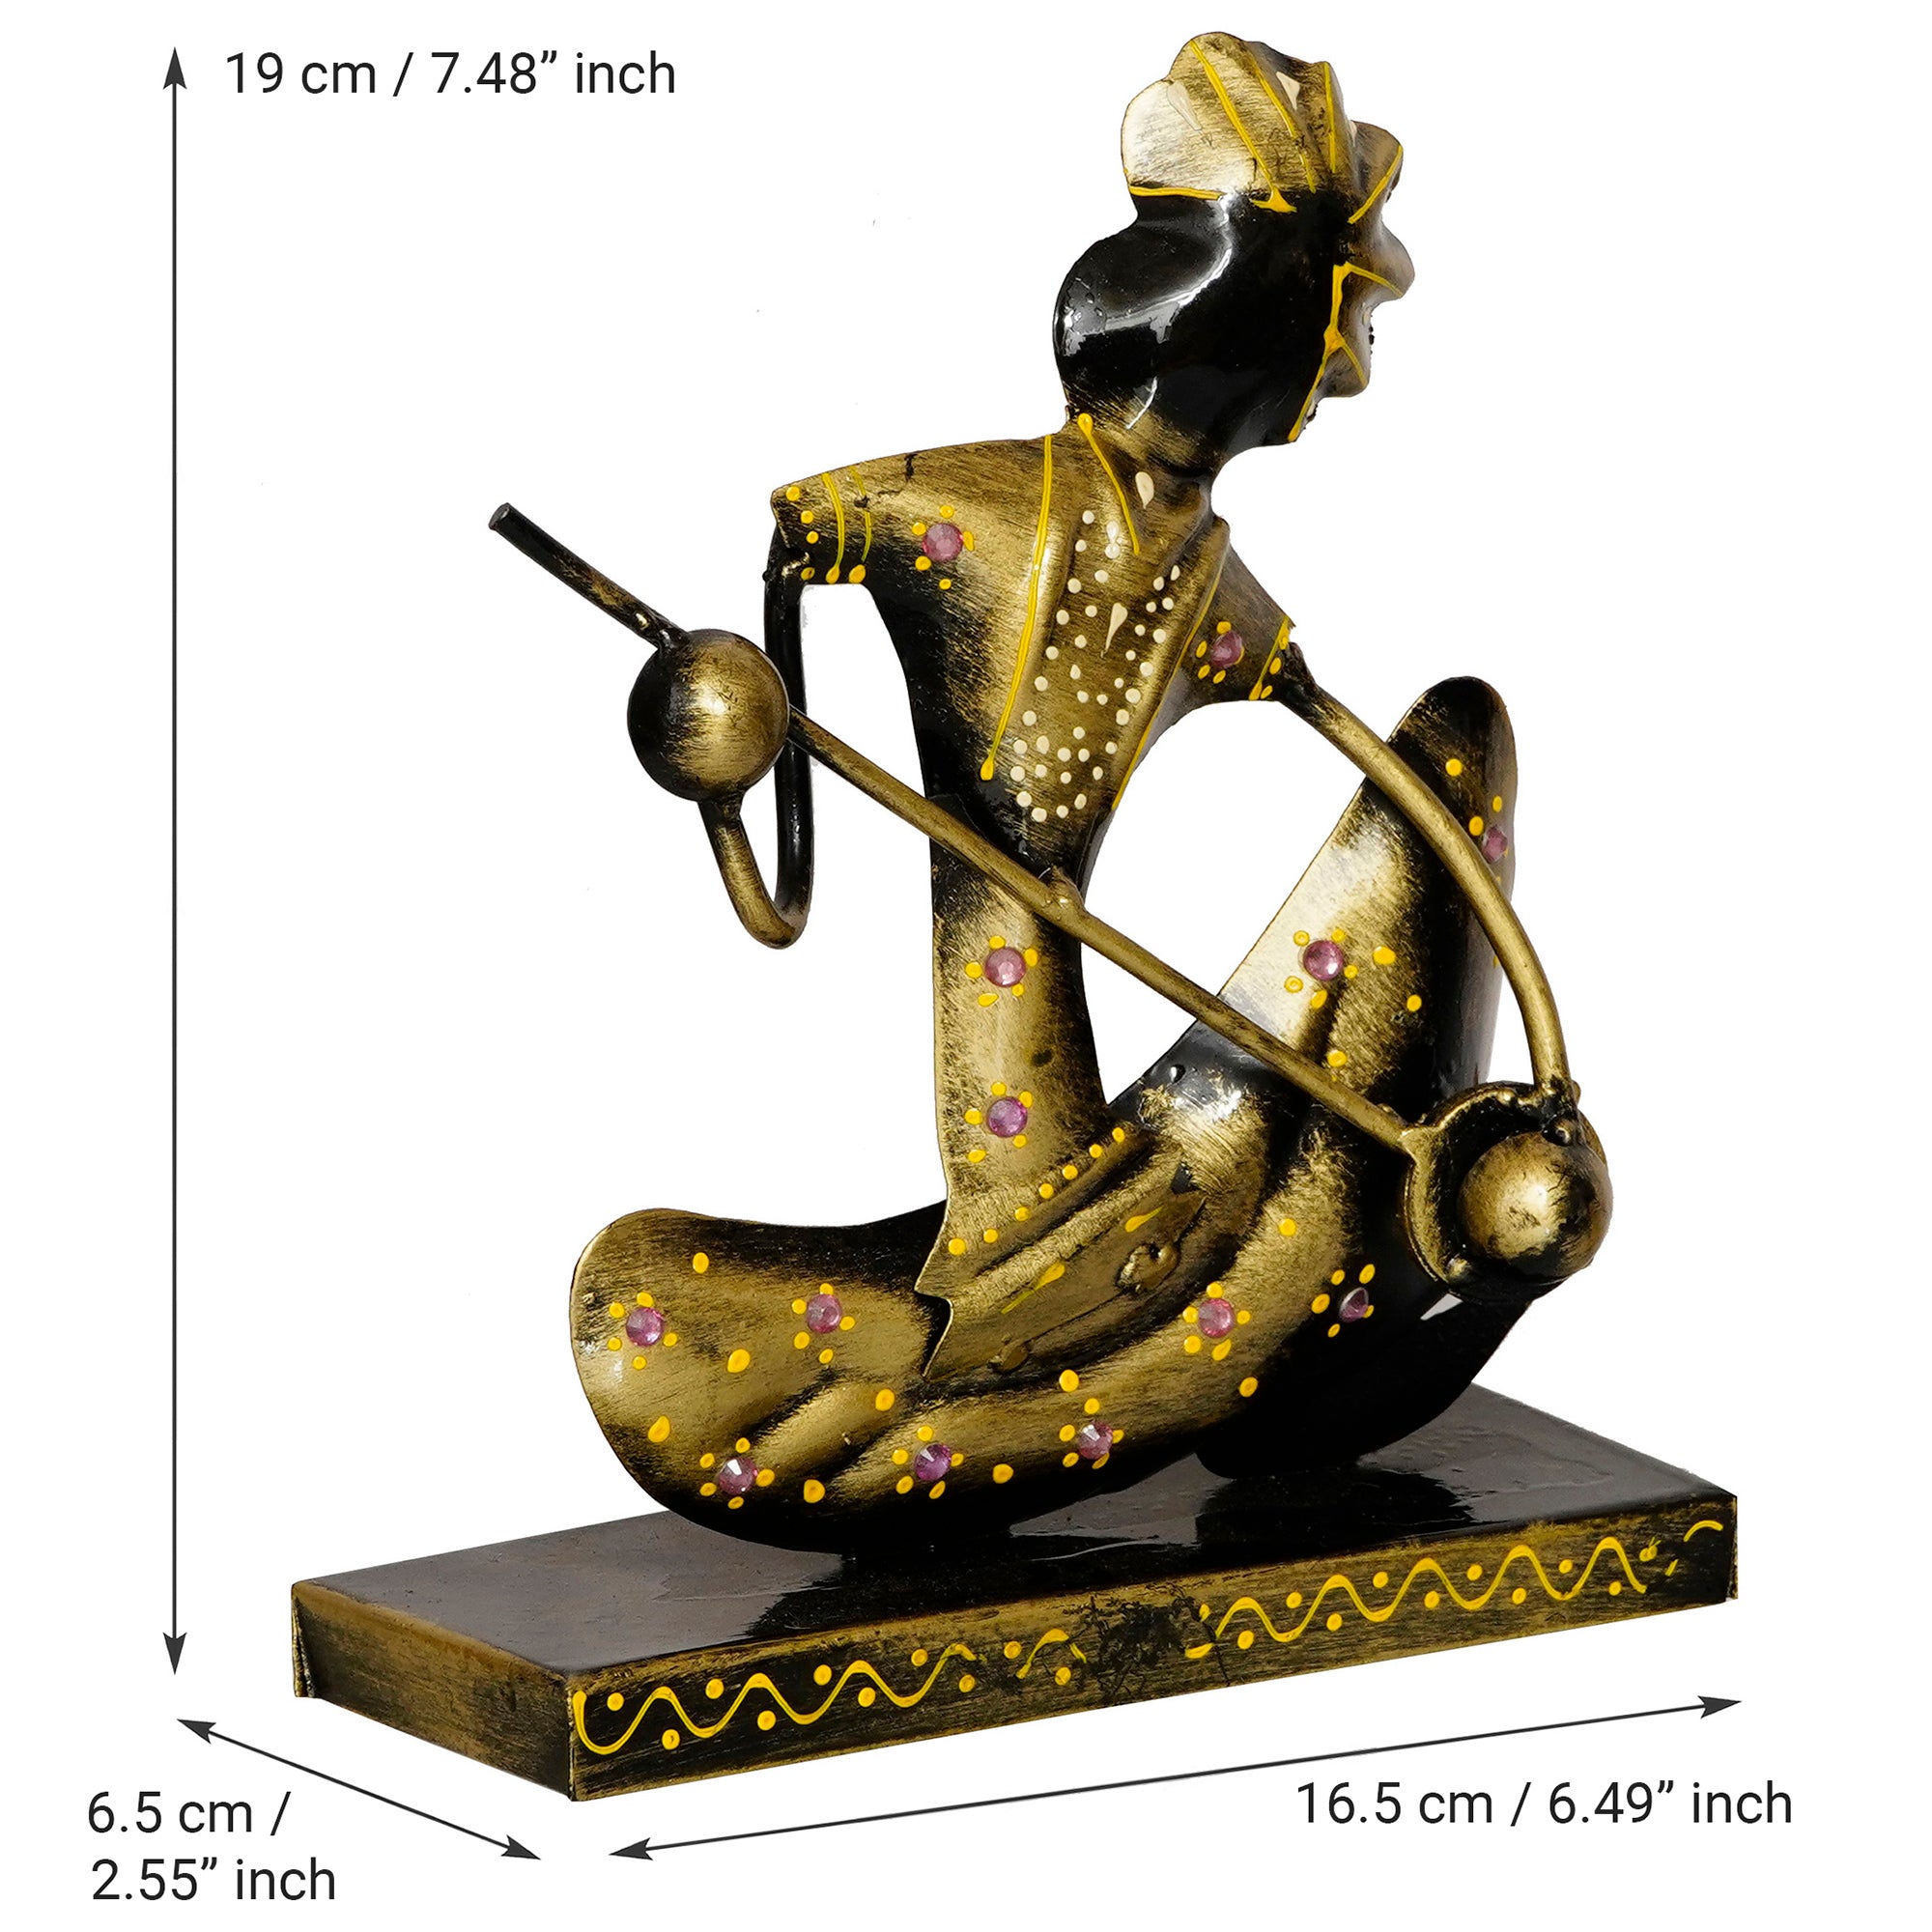 Iron Tribal Man Figurine with Paghdi Playing Banjo Musical Instrument Decorative Showpiece (Golden and Black) 3